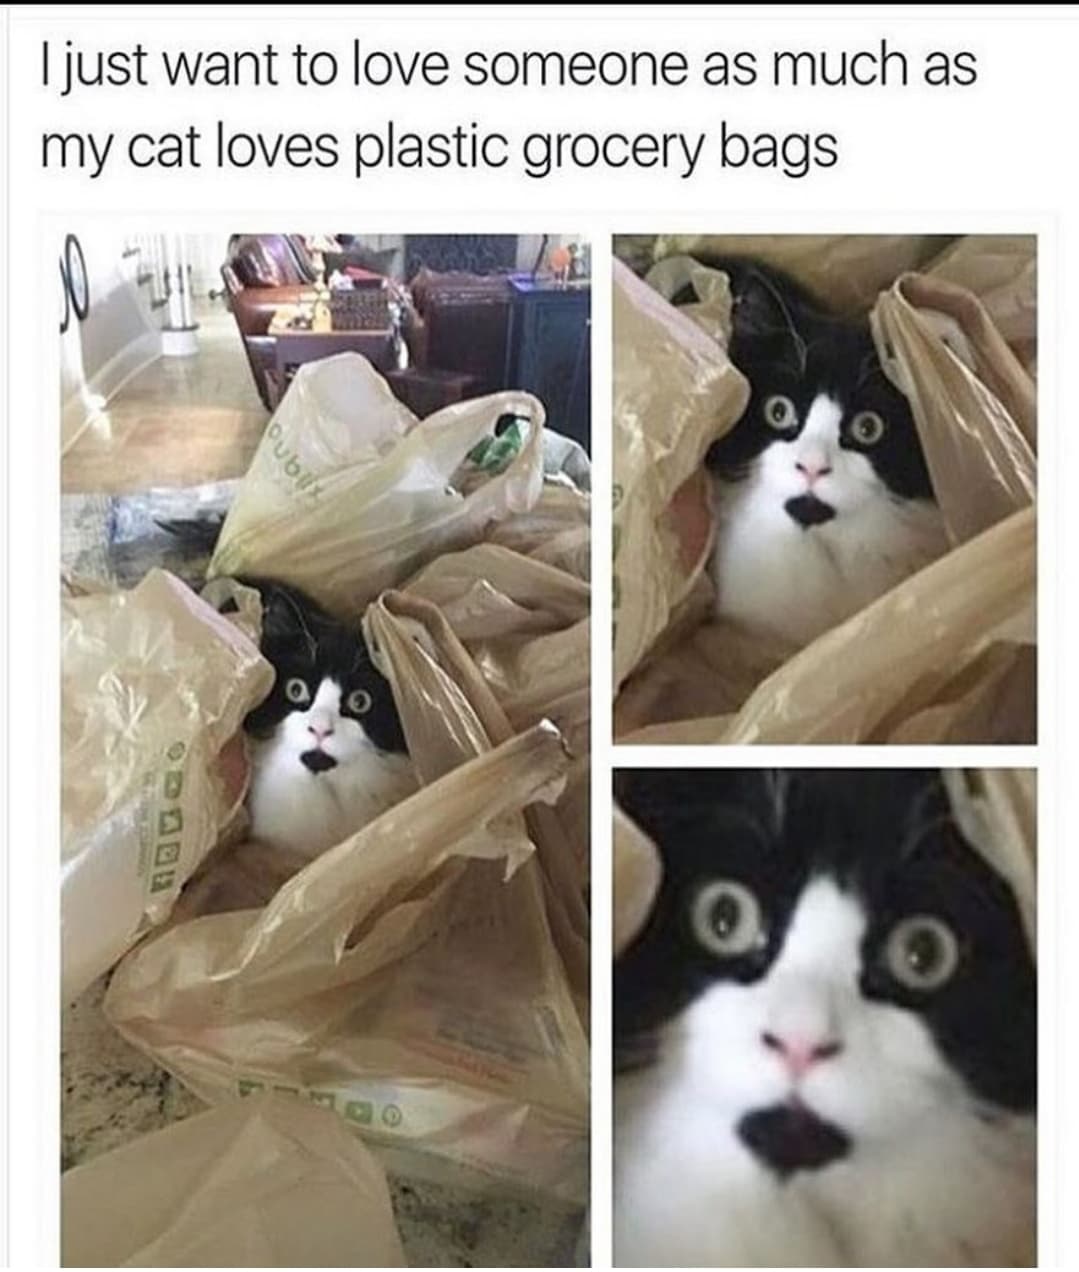 Cat Memes - crazy relationship cat memes - I just want to love someone as much as my cat loves plastic grocery bags